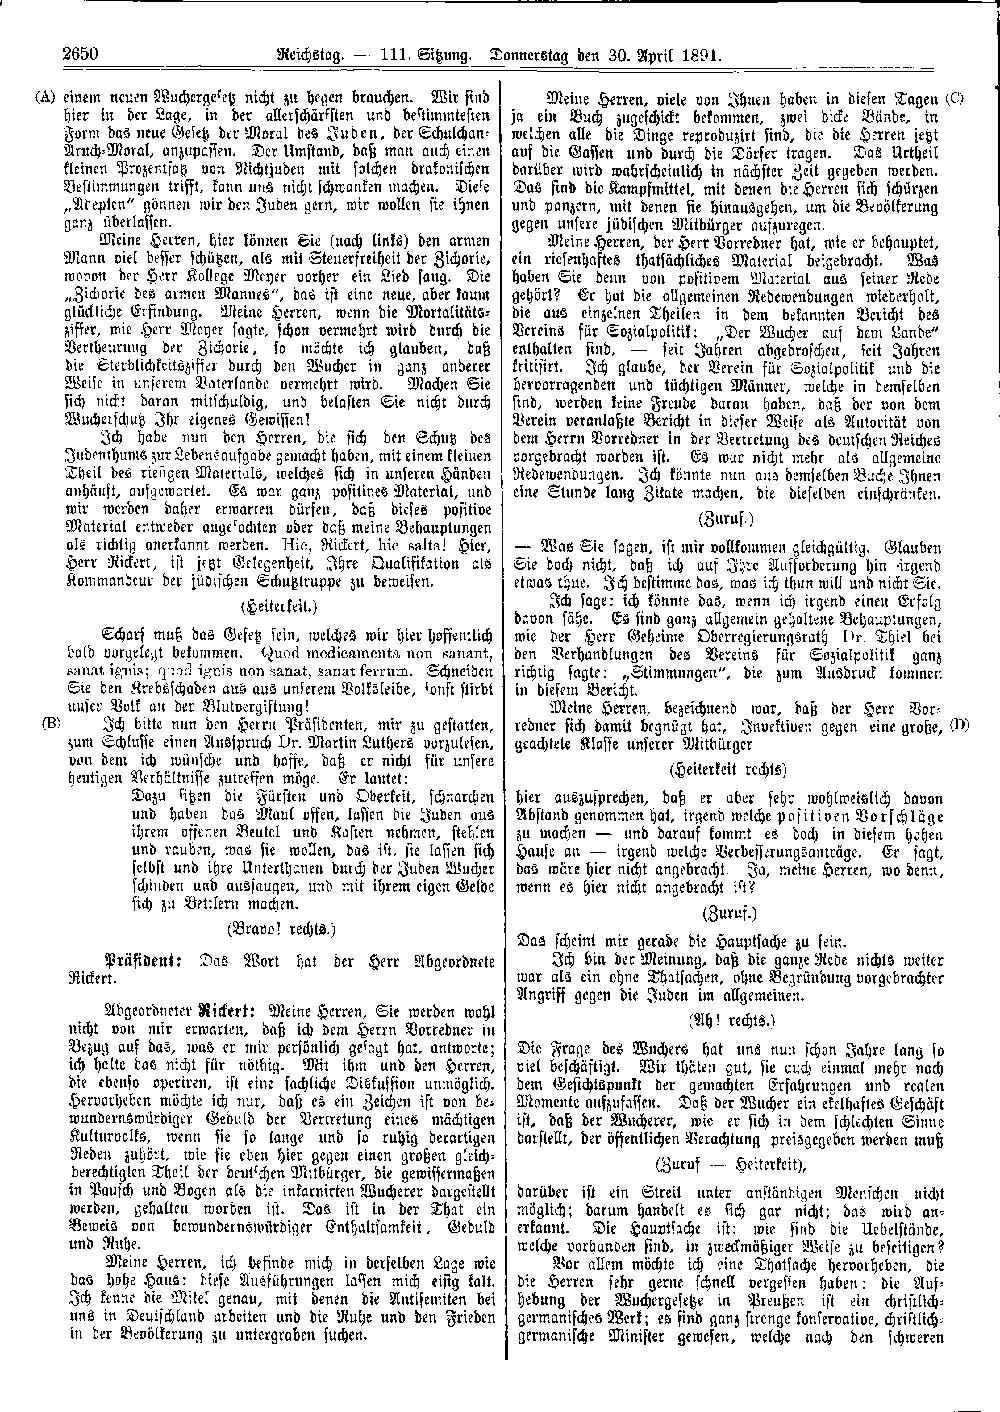 Scan of page 2650